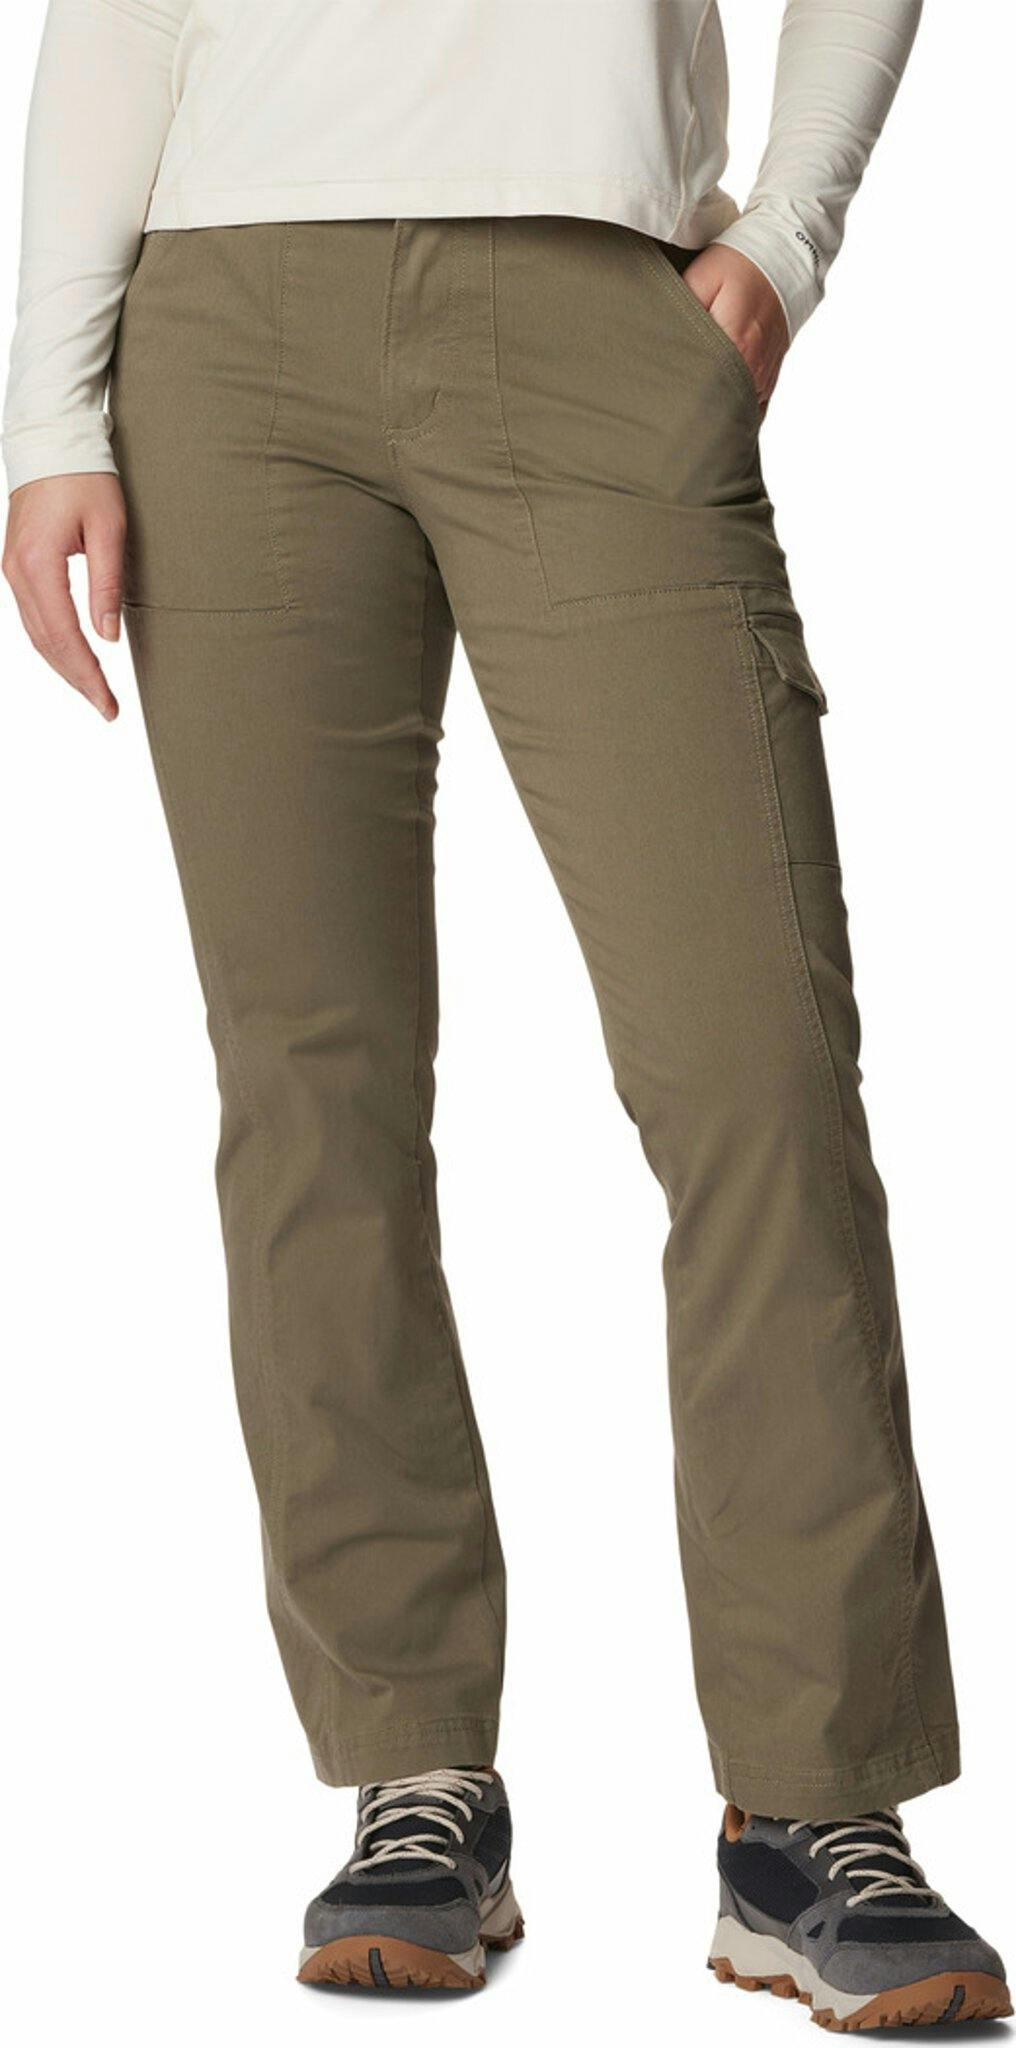 Product image for Calico Basin Cotton Pants - Women's